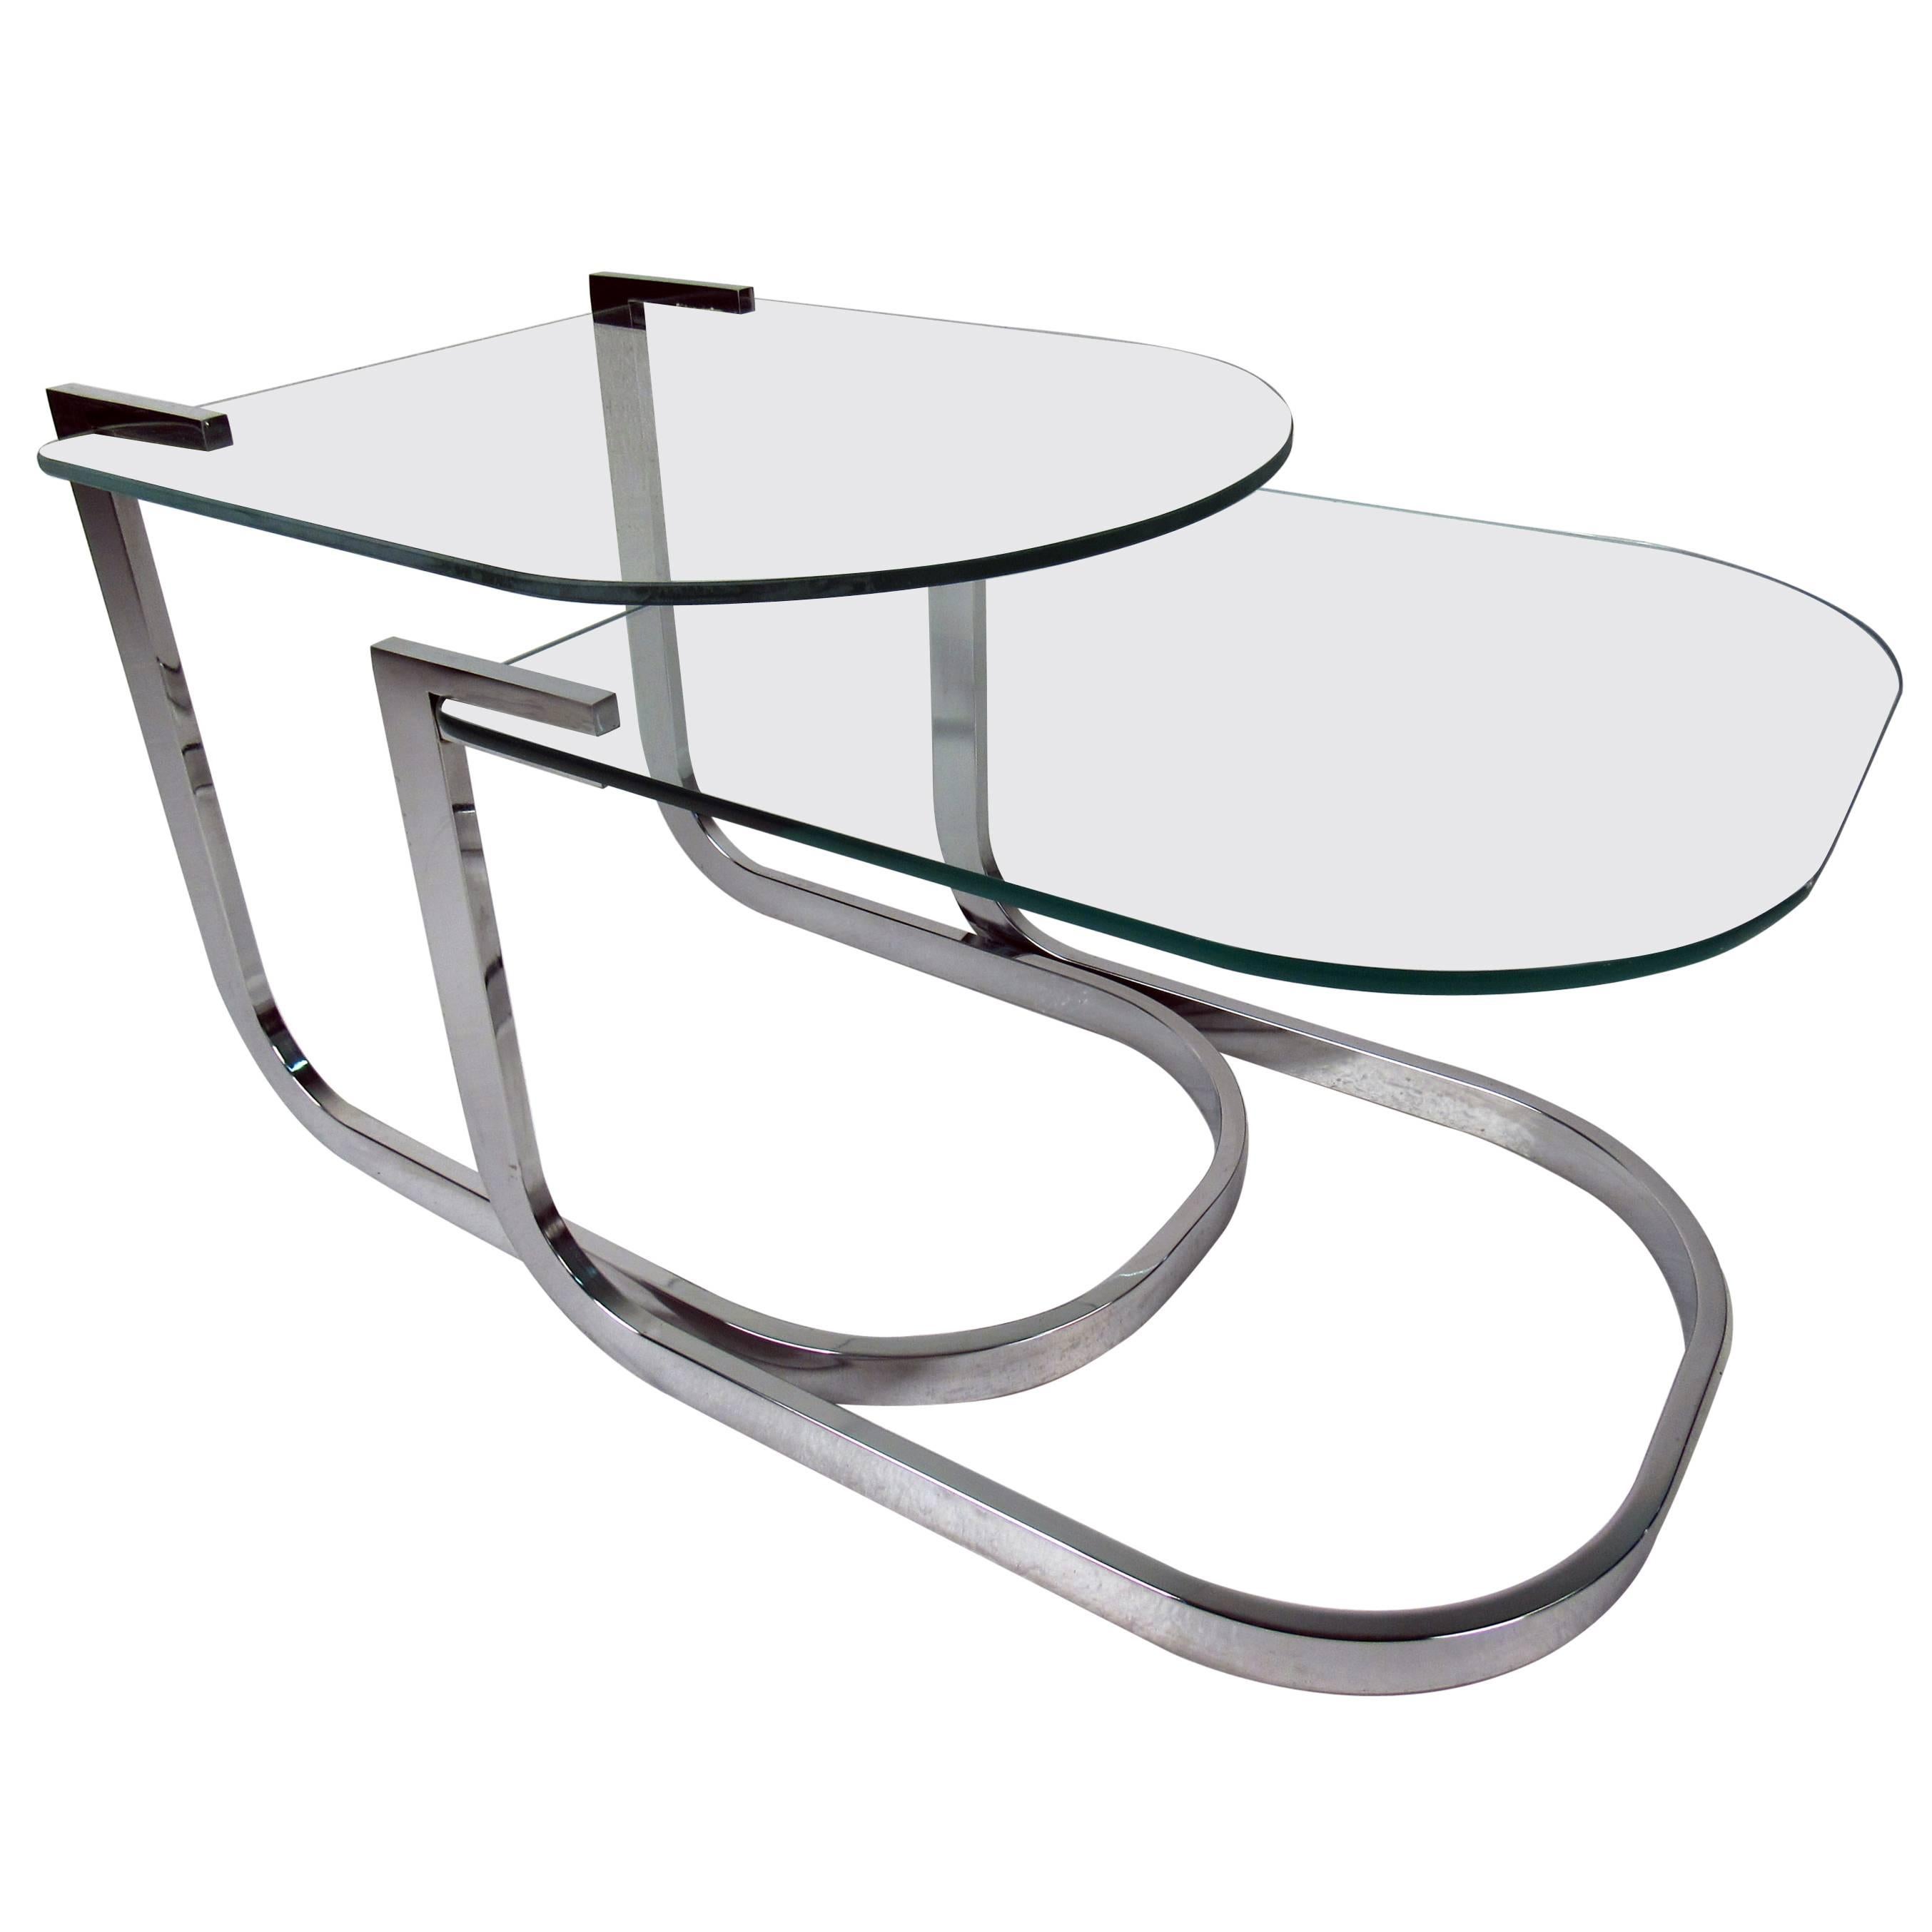 Set of Midcentury Chrome and Glass Nesting Tables by DIA